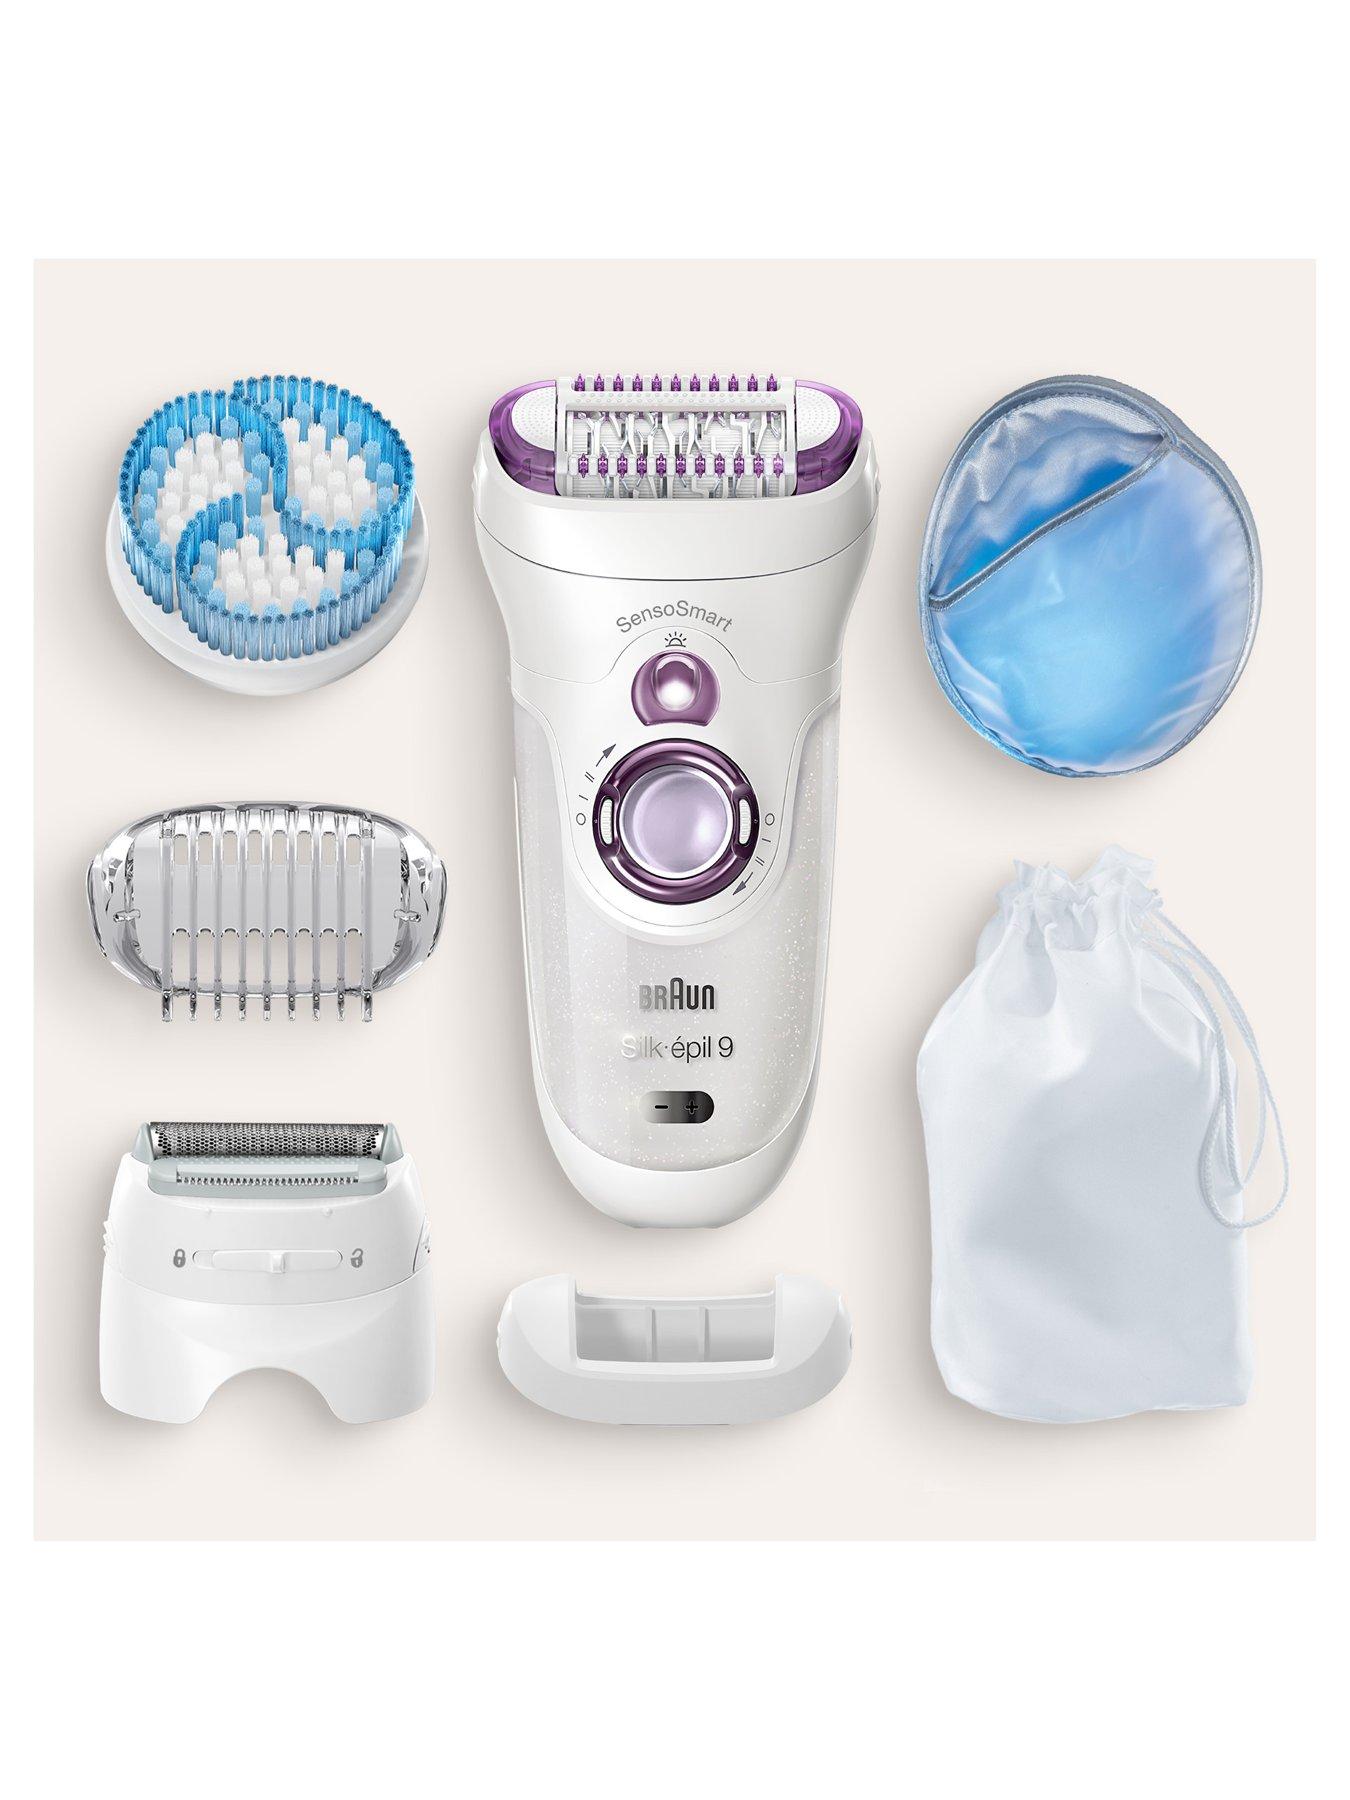 Braun Silk-épil 9, Epilator For Long Lasting Hair Removal, 4 Extras, Pouch,  Cooling Glove, 9-735